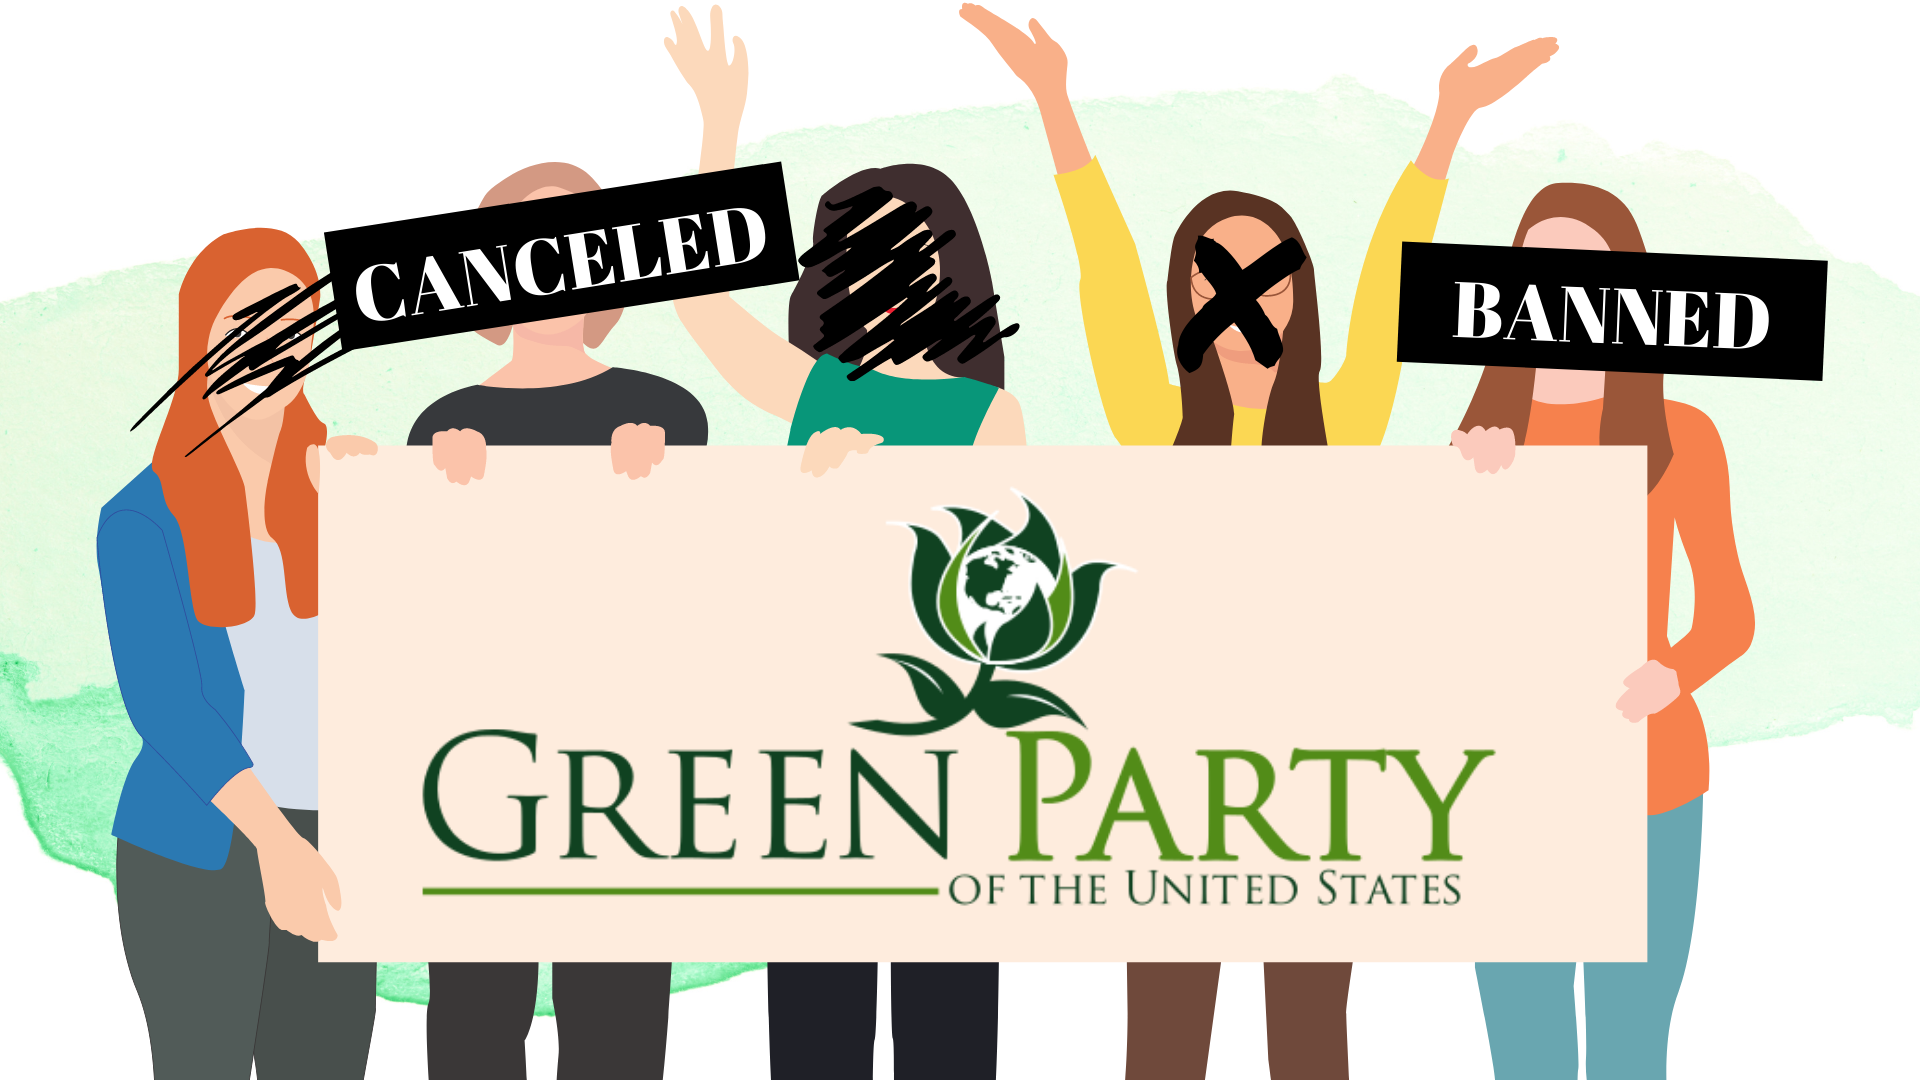 Green Party of the United States -- Women Cancelled and Banned